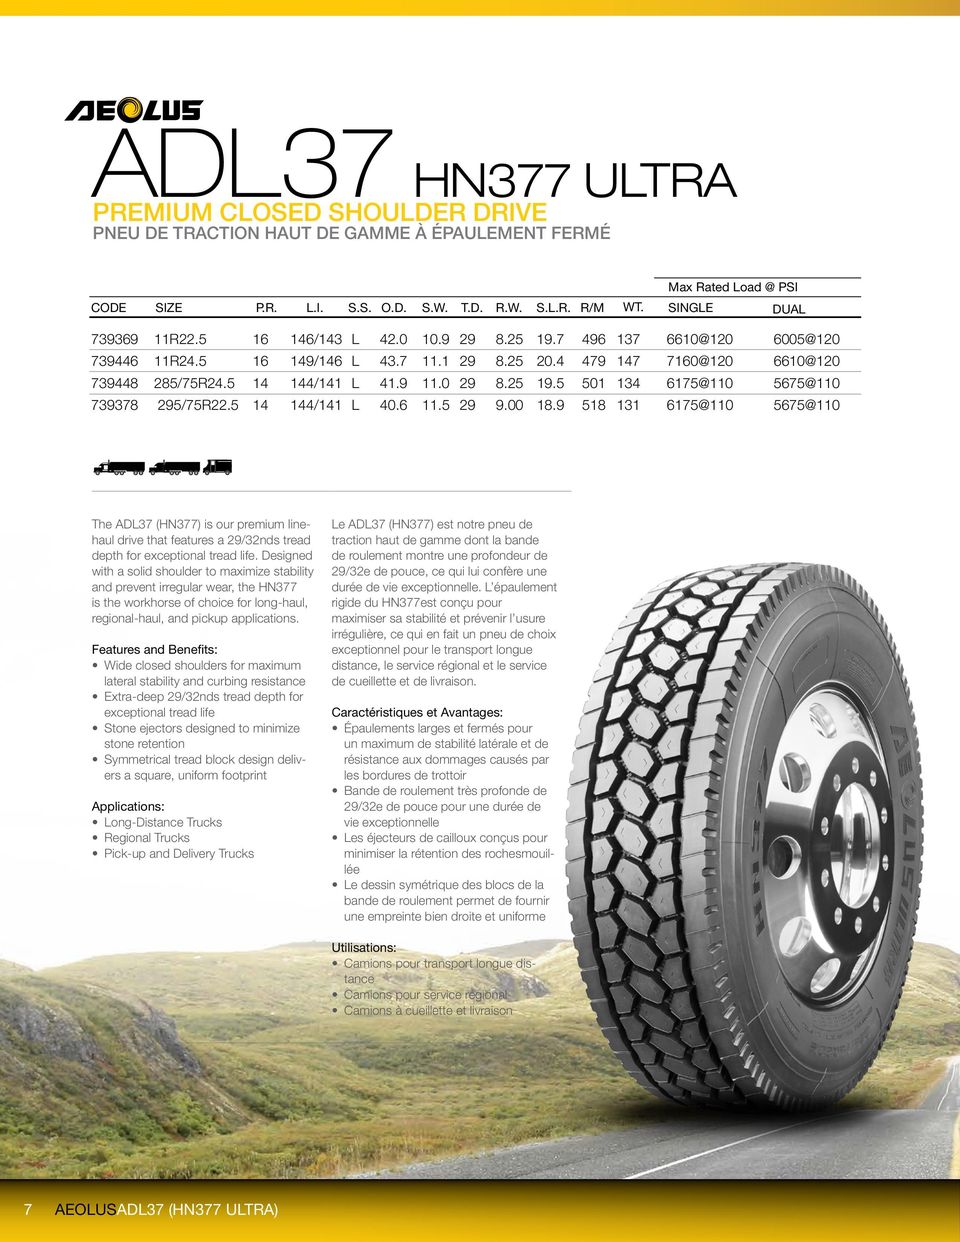 9 518 131 6175@110 5675@110 The ADL37 (HN377) is our premium linehaul drive that features a 29/32nds tread depth for exceptional tread life.